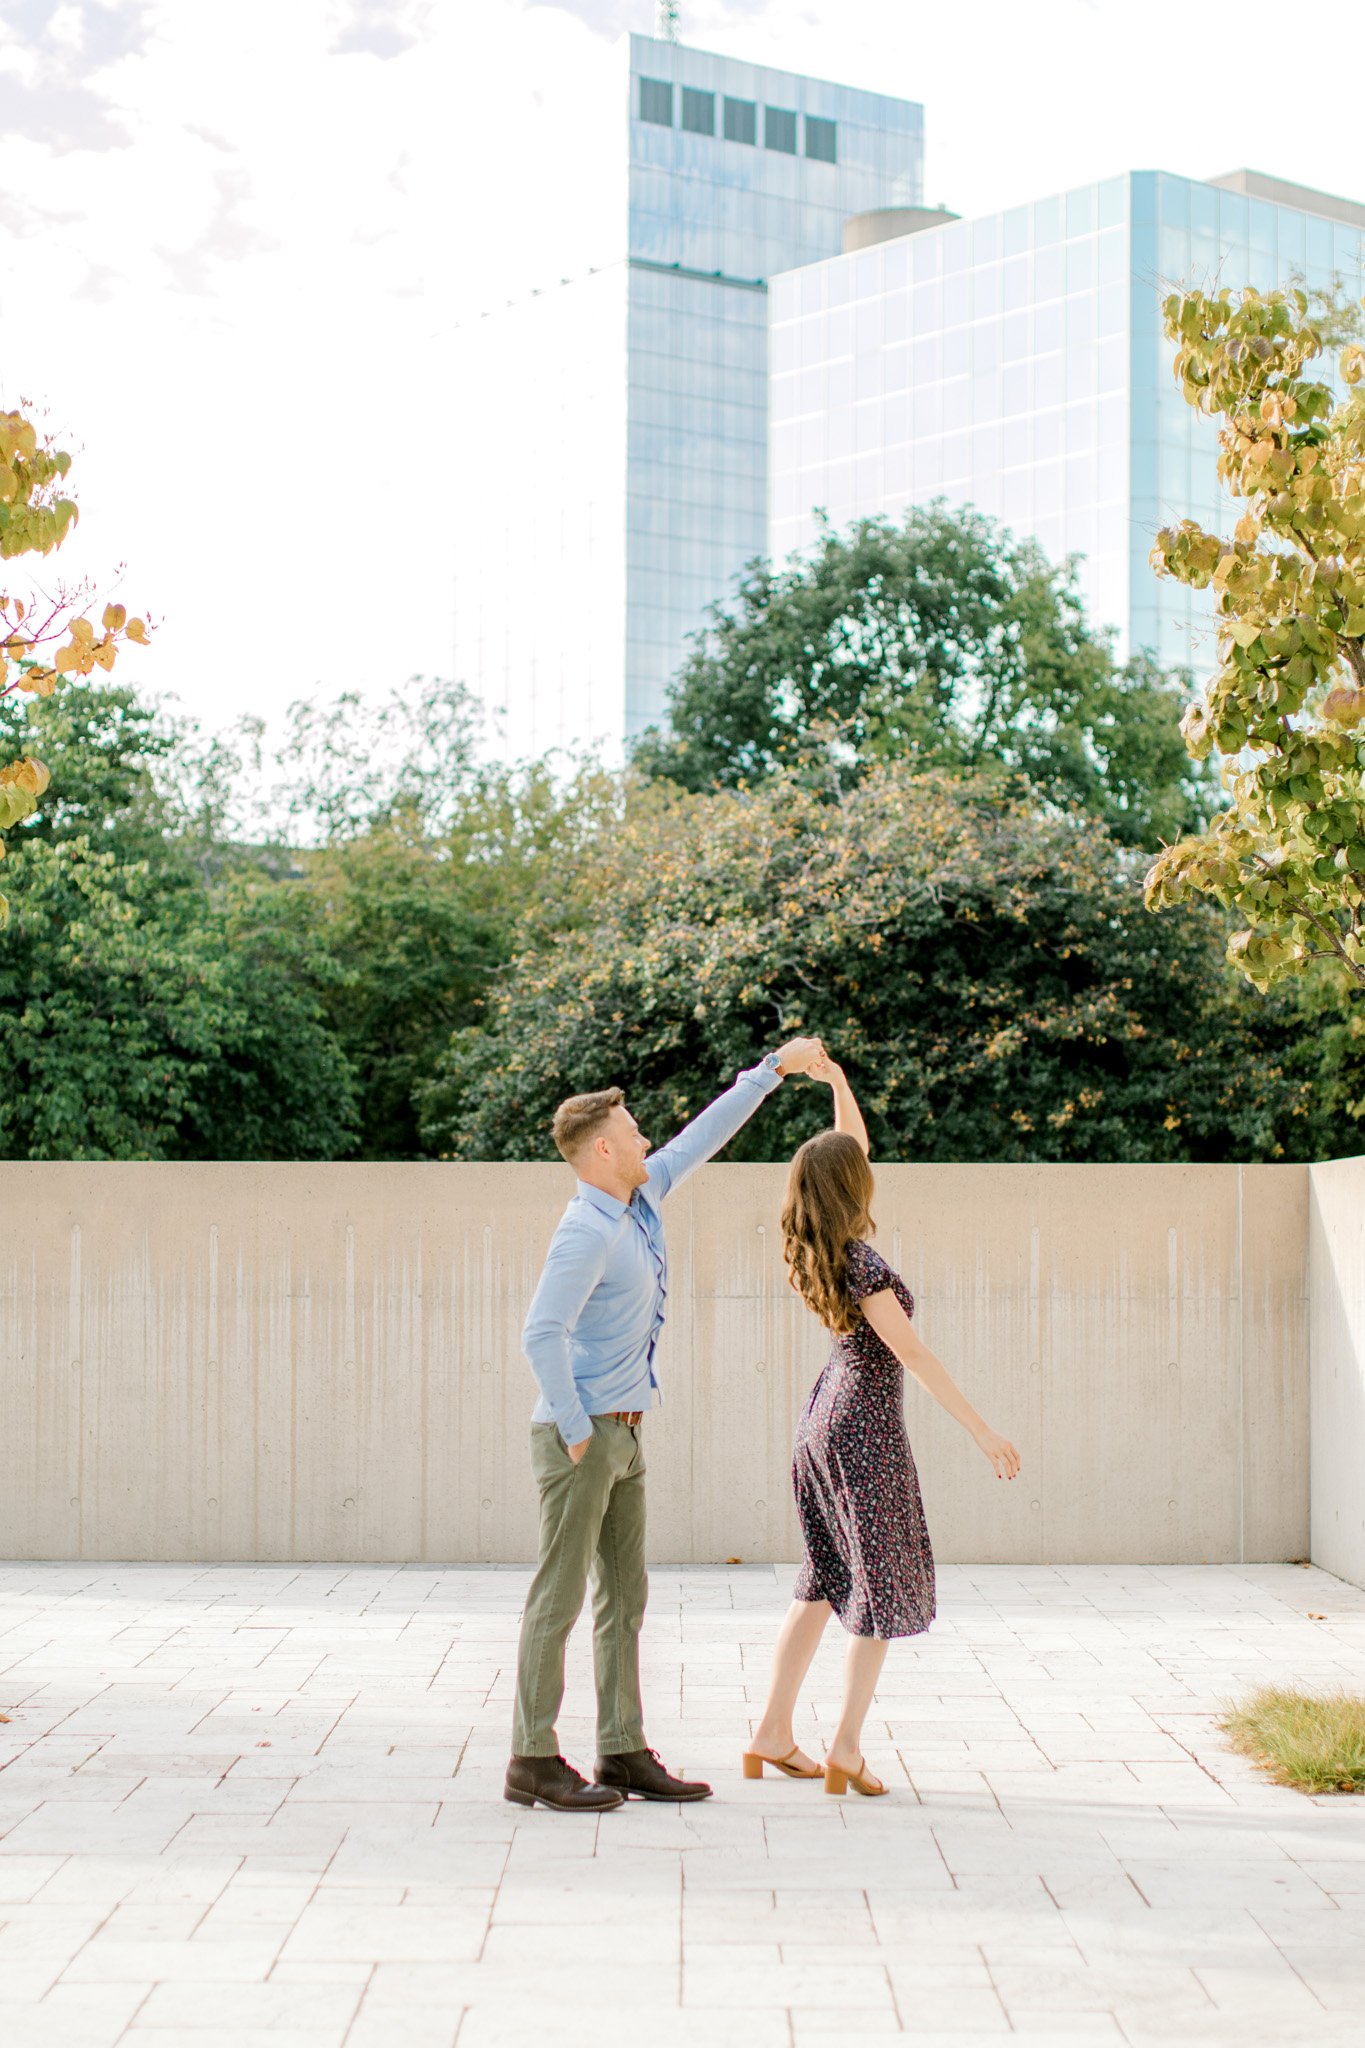 City of Grand Rapids Engagement Session | West Michigan Wedding Photographer 